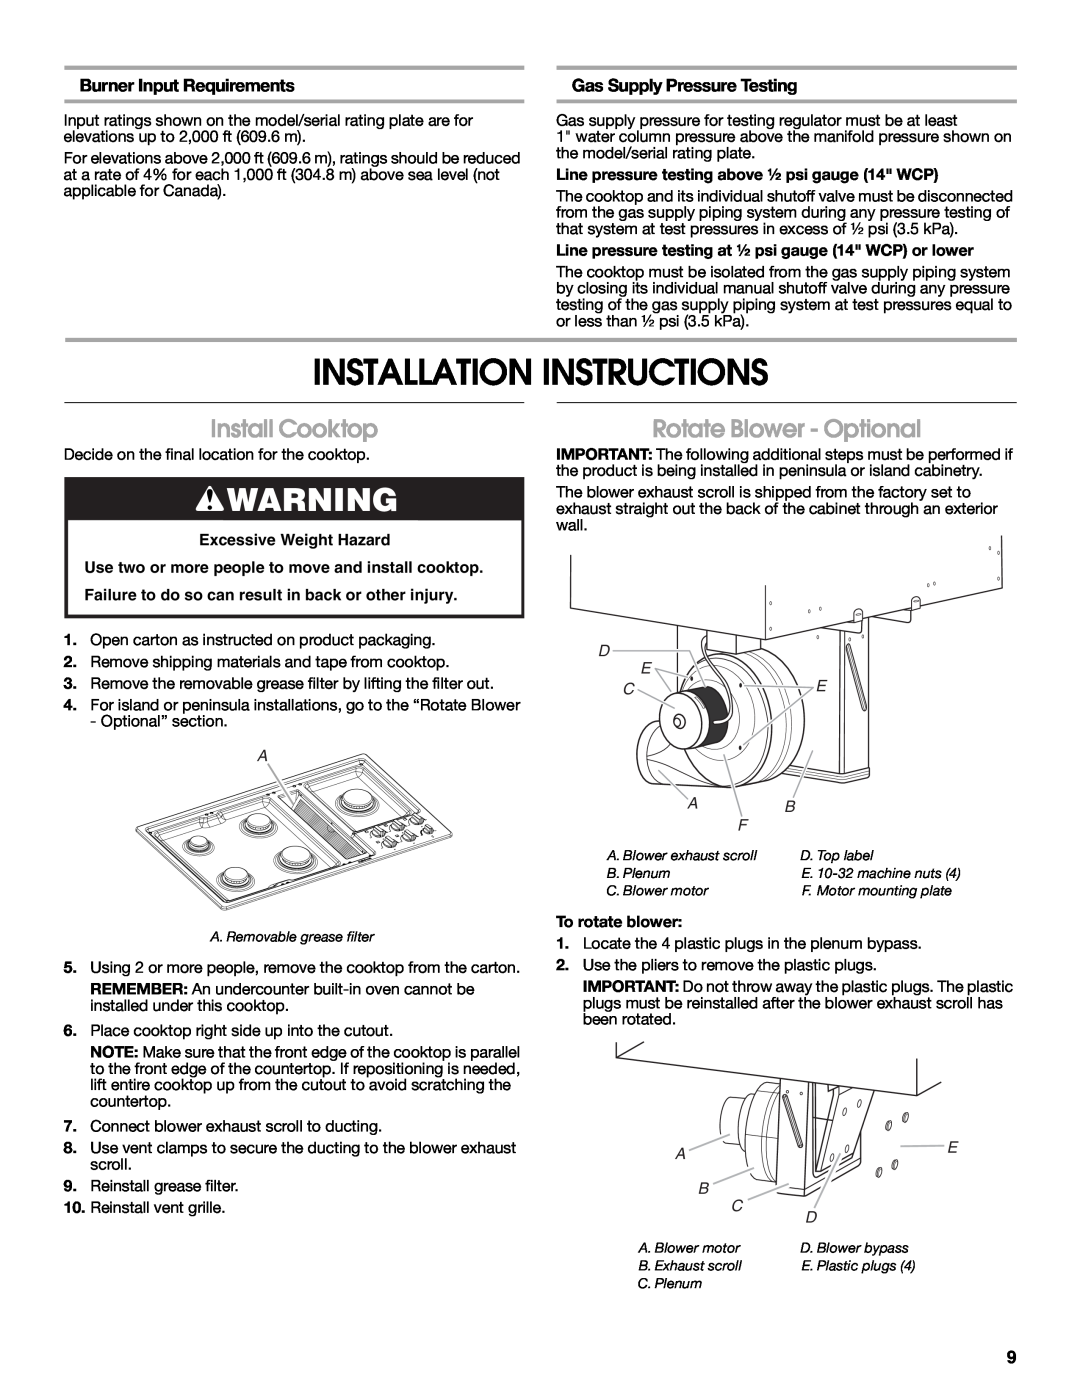 Jenn-Air W10197058B Installation Instructions, Install Cooktop, Rotate Blower - Optional, Burner Input Requirements 